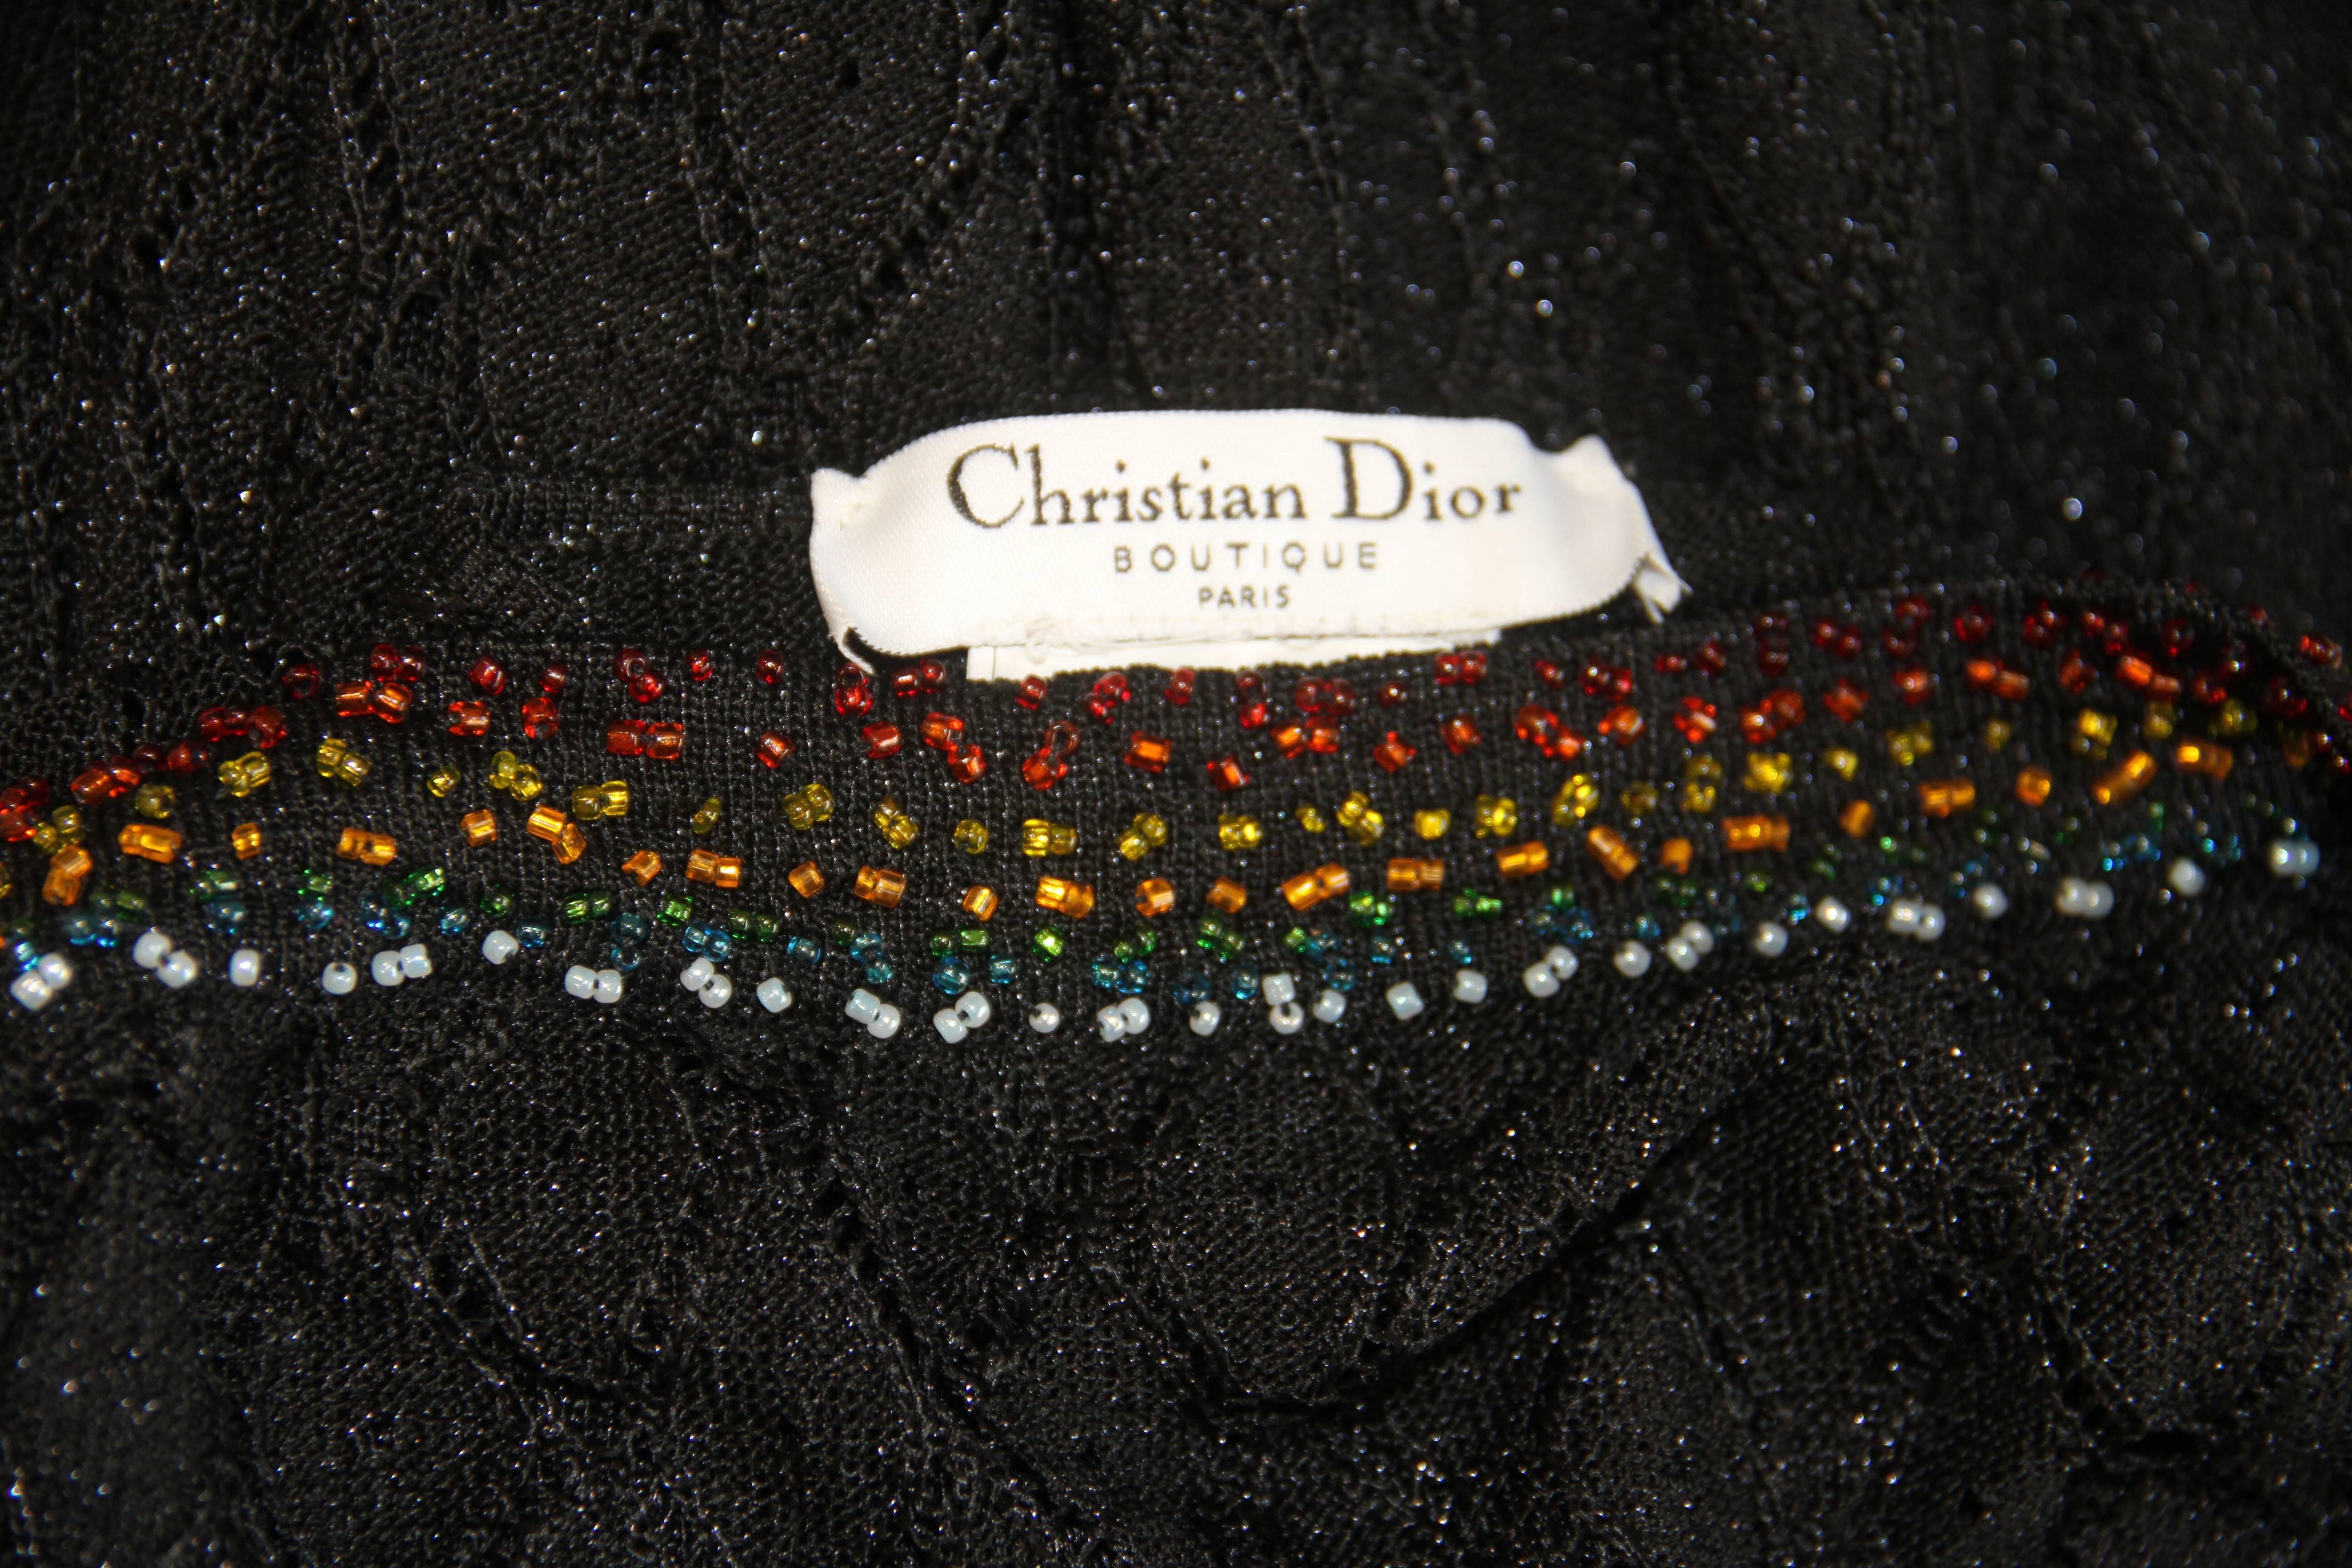 A John Galliano For Christian Dior black lurex knit beaded evening gown from the Fall 2001 collection.

Marked a French size 36.

Fabric content - 78% acetate / 12% polyester / 10% nylon